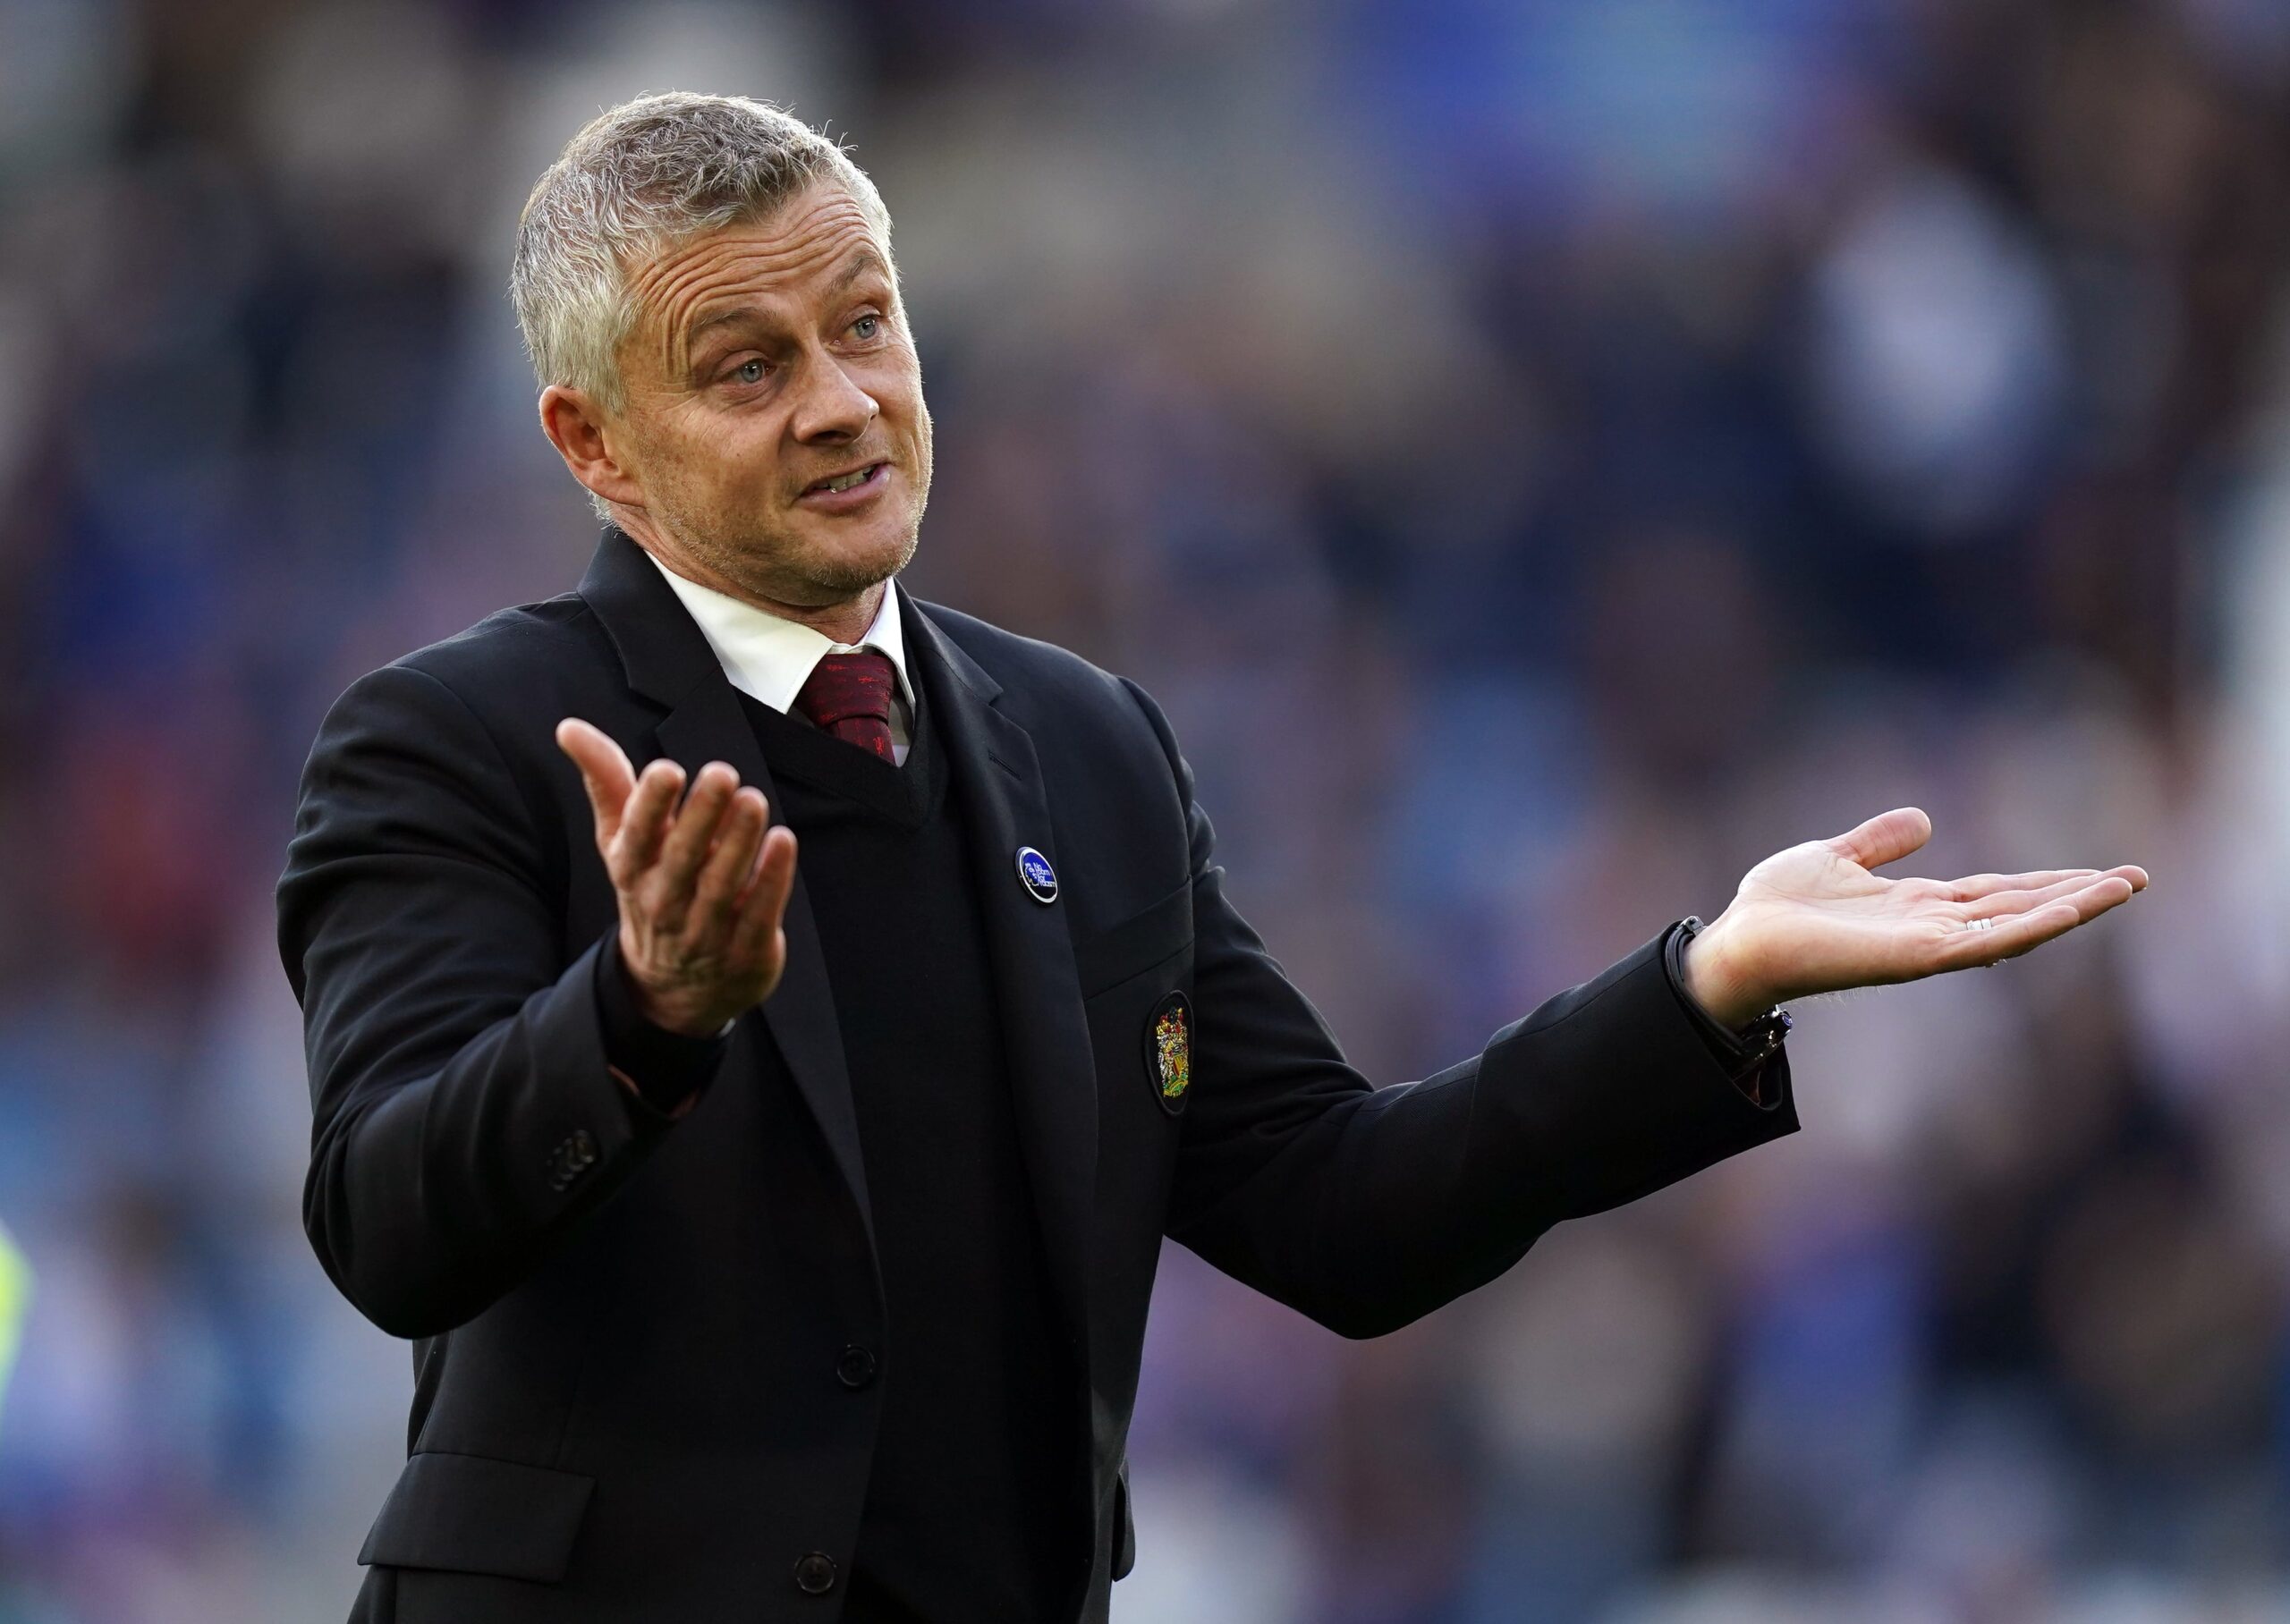 United manager Ole departs from his role